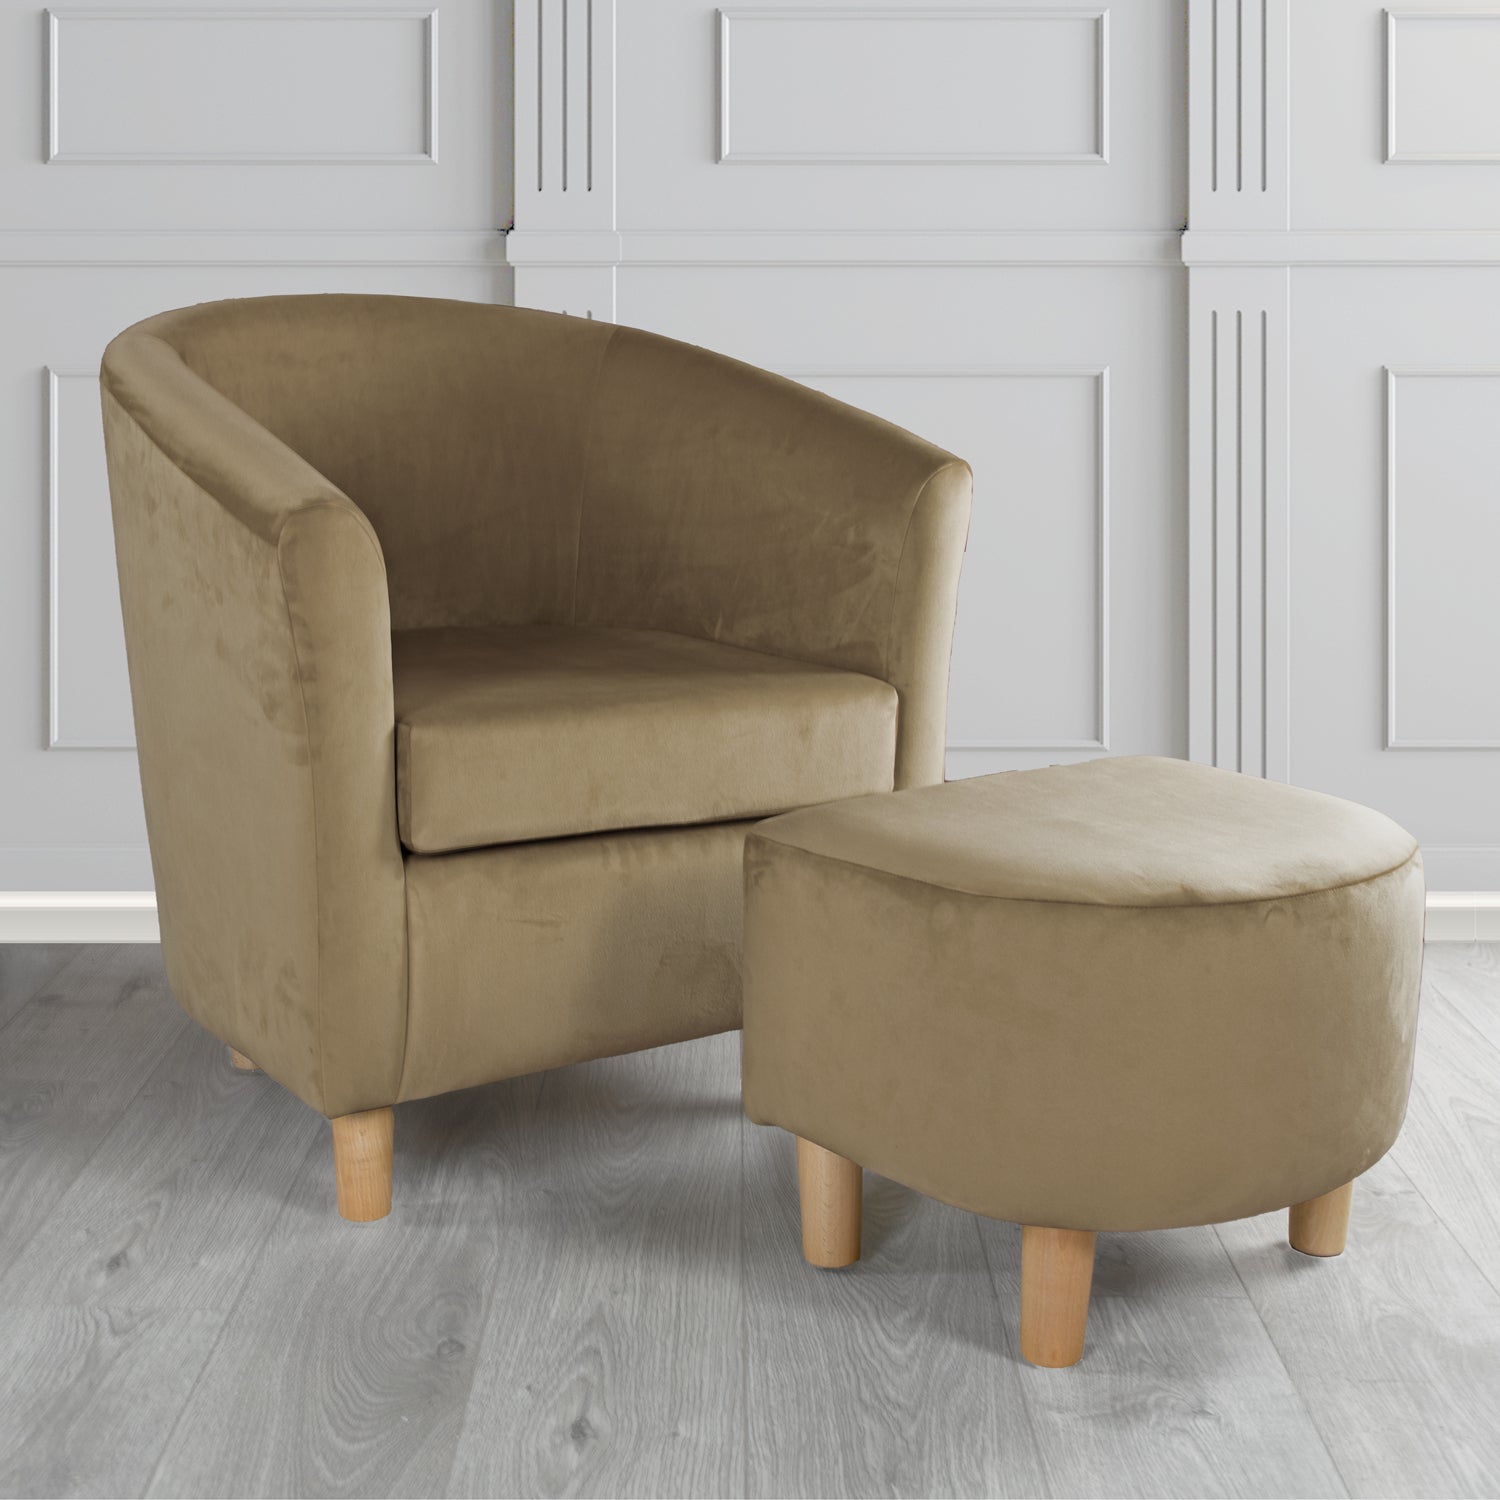 Tuscany Monaco Biscuit Plush Velvet Plain Fabric Tub Chair with Footstool Set (6592007307306)